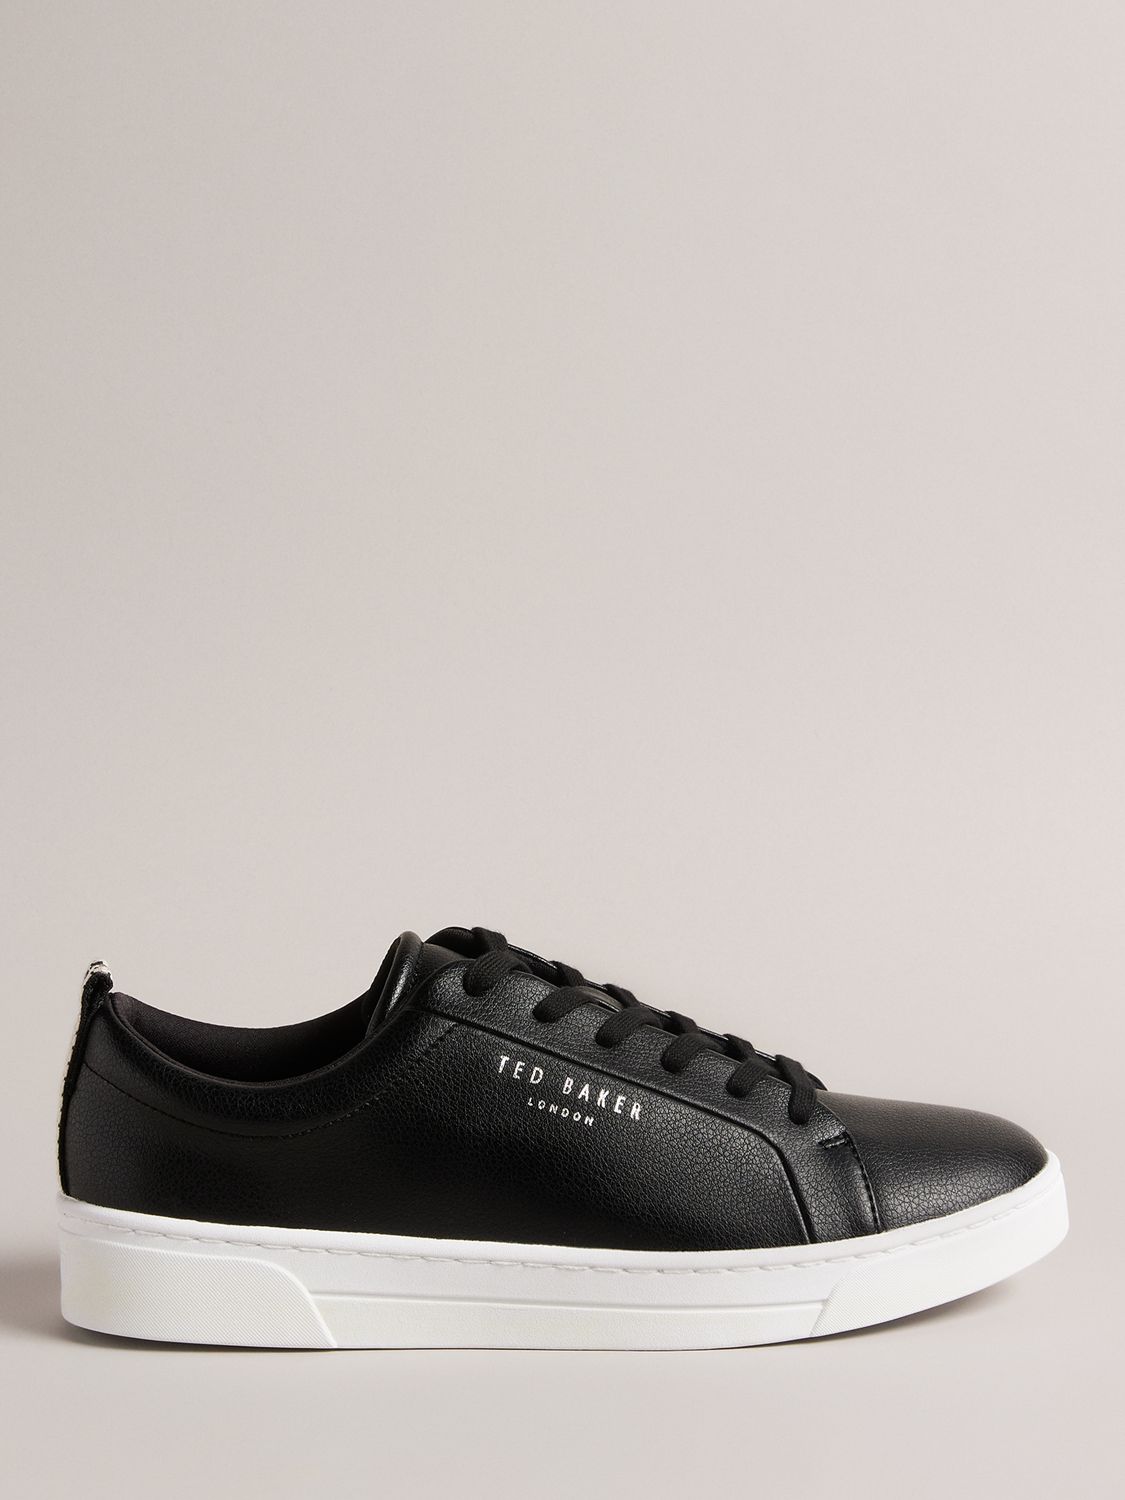 LIMITED COLLECTION White and Black Flatform Trainer In Wide Fit